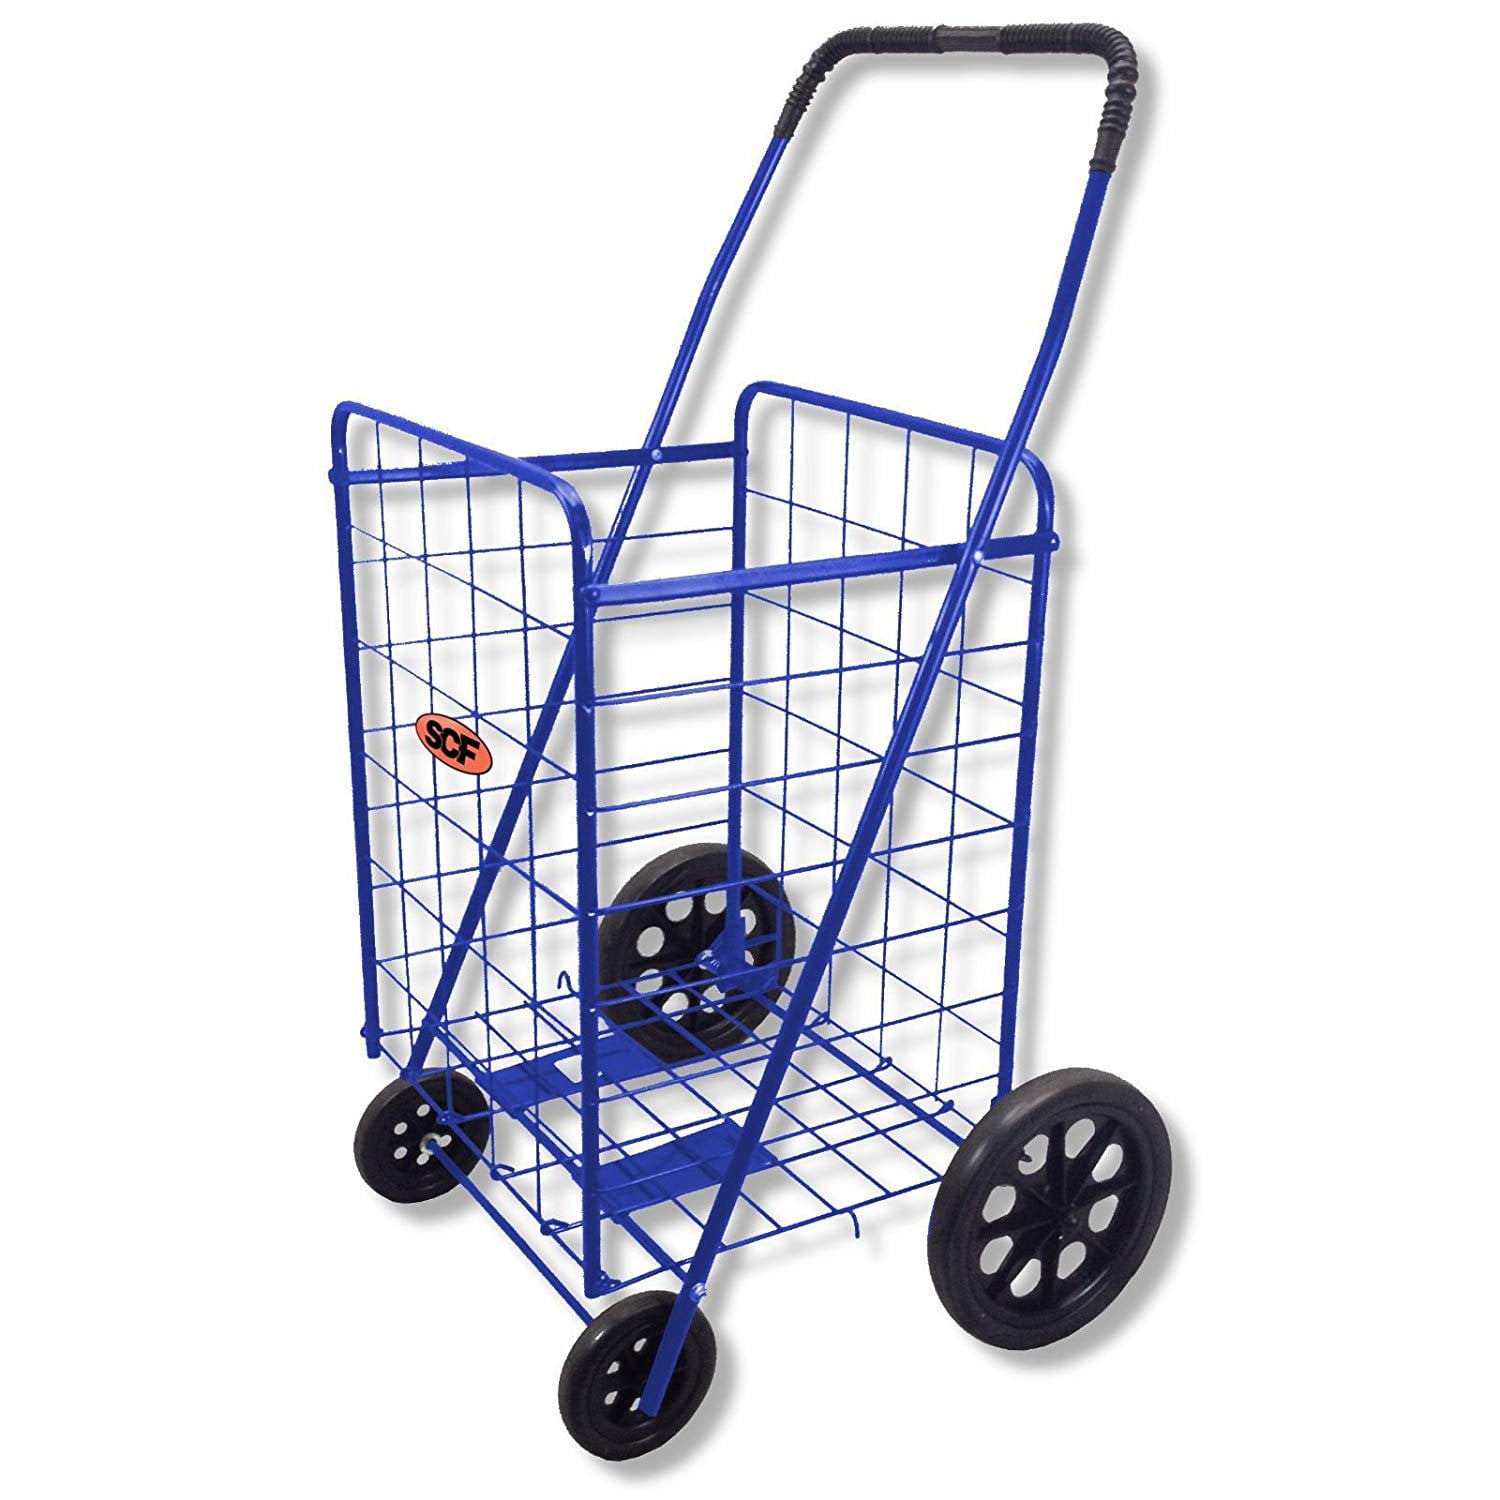 DNSJB Lightweight Shopping Cart Trolley,4 Wheel Wheeled Trailer Large Capacity Foldable 